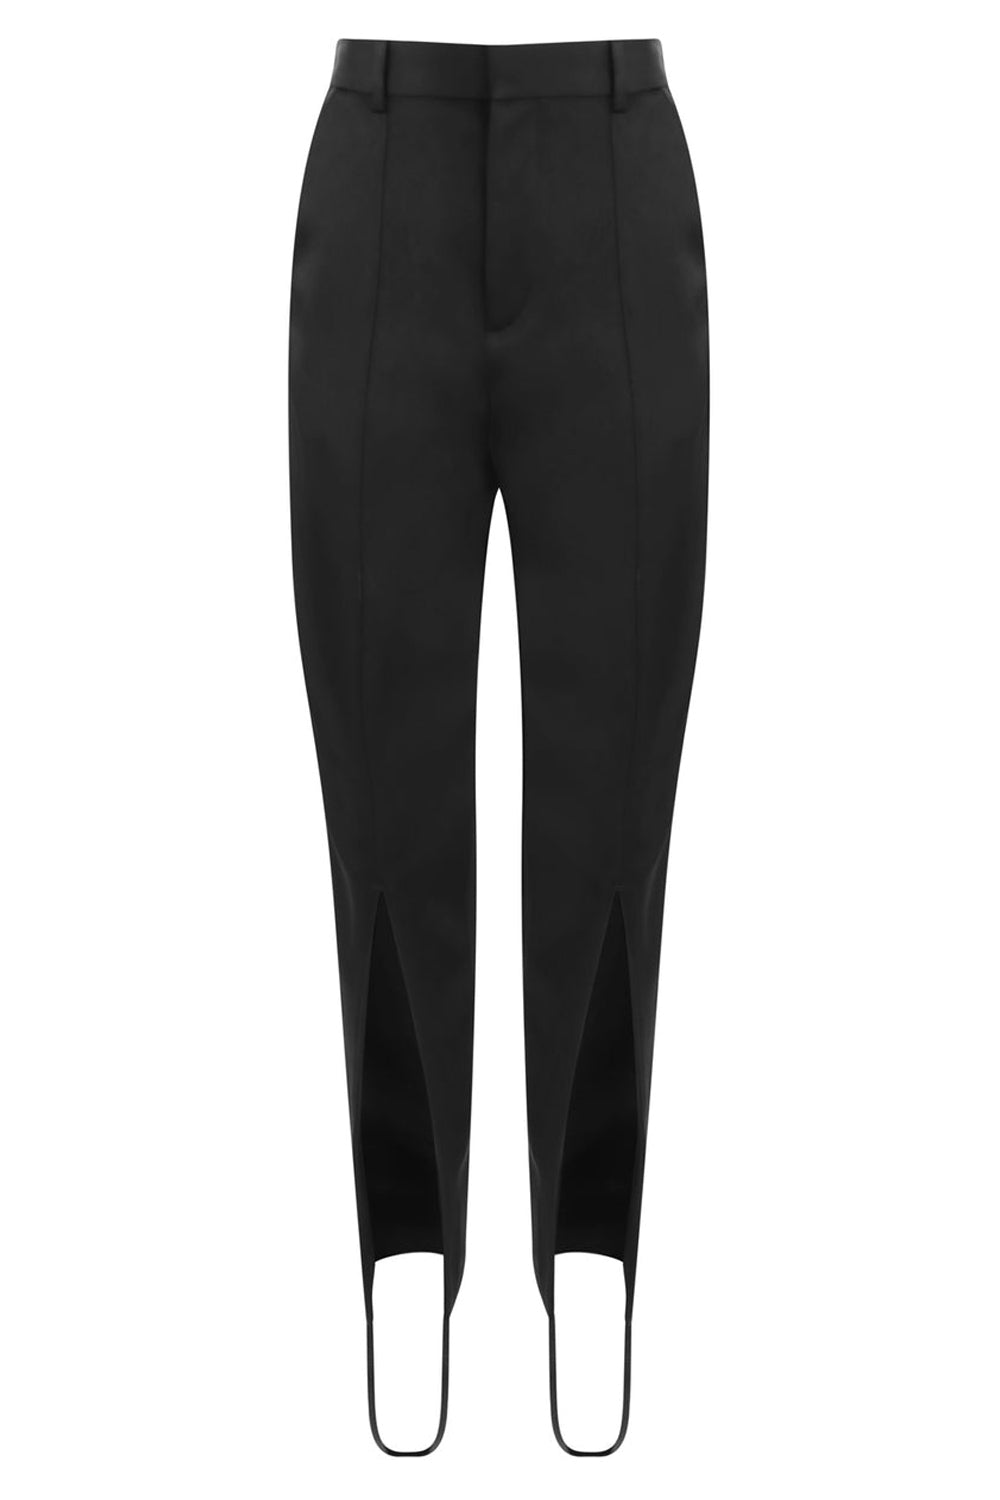 Y/PROJECT RTW TAILORED STIRRUP PANT BLACK